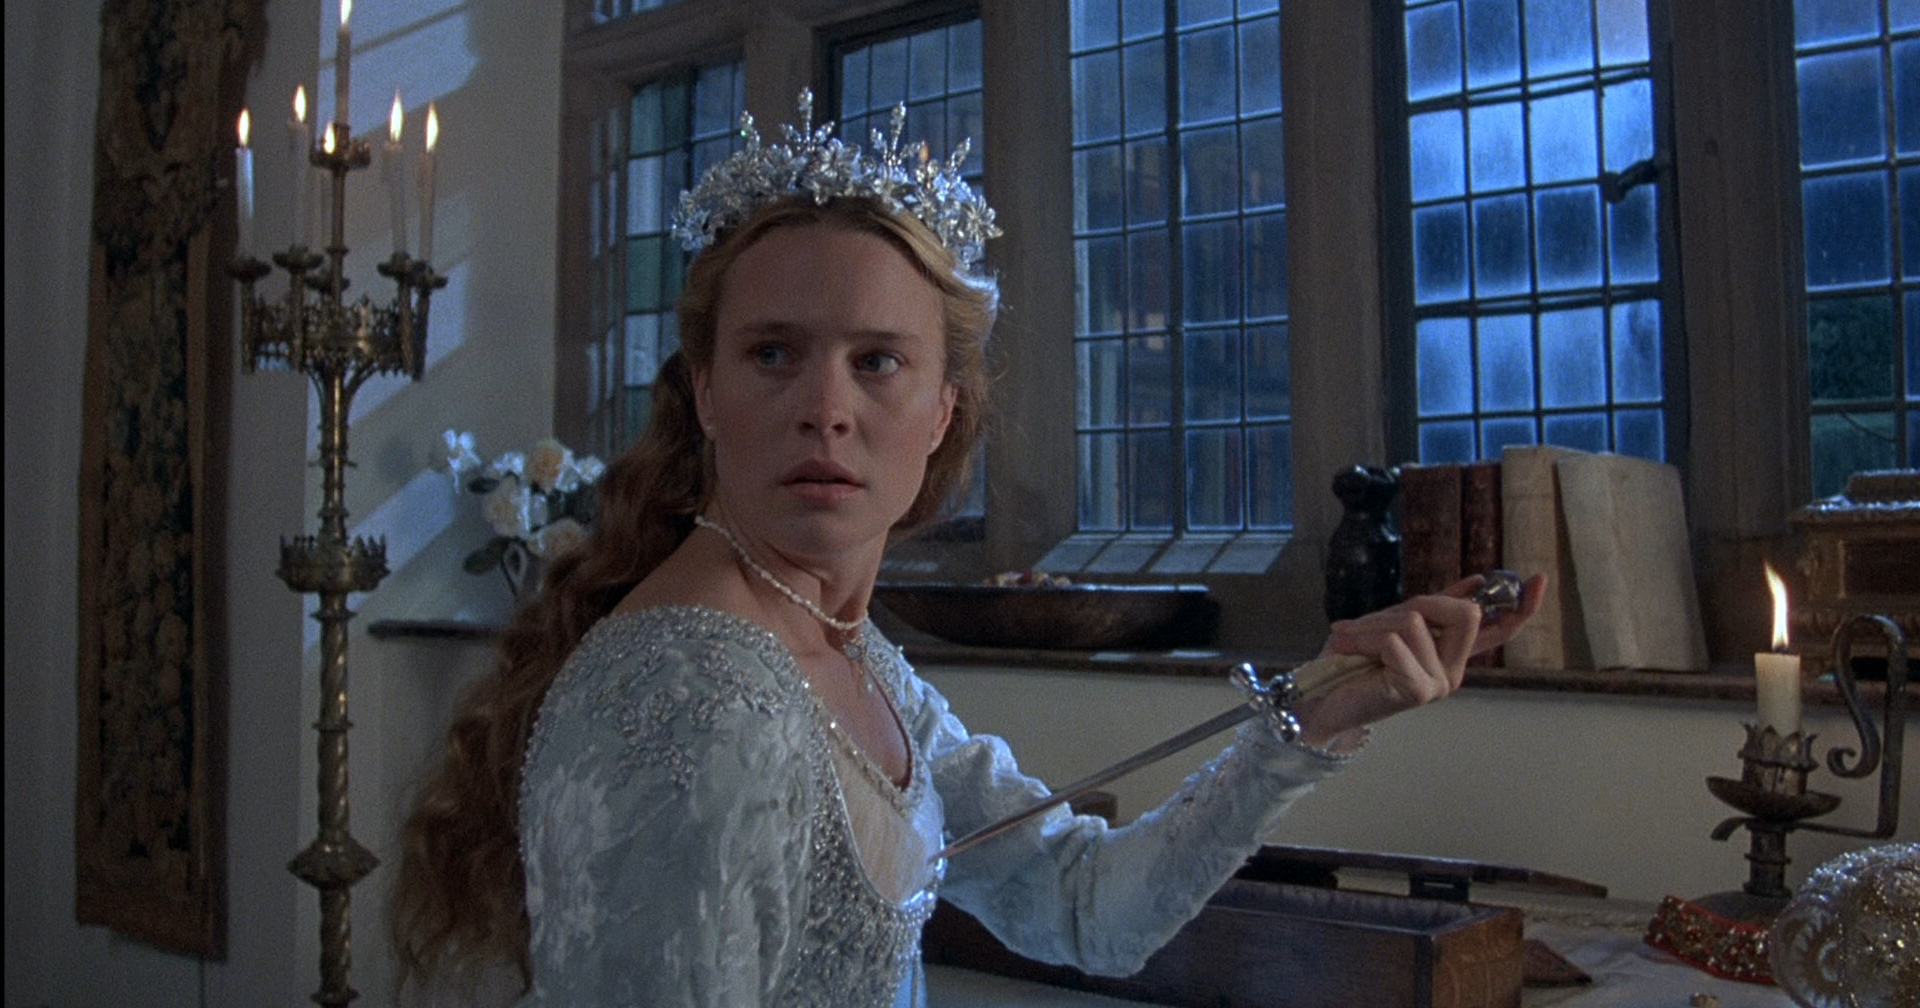 Robin Wright as Buttercup in The Princess Bride